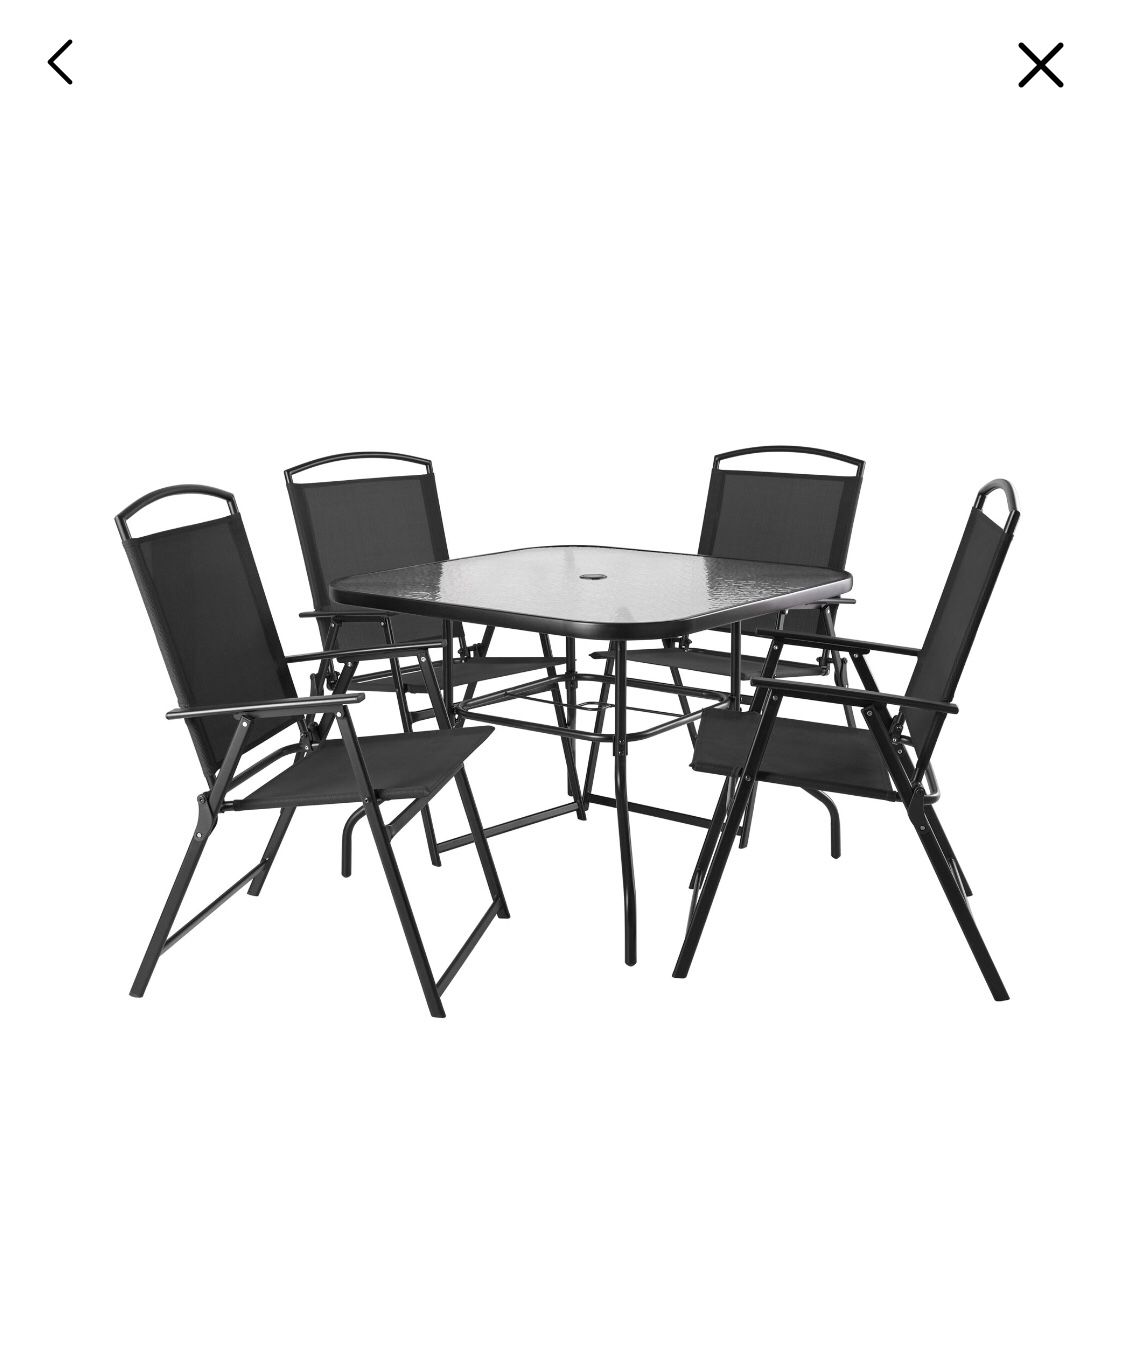 Mainstays Albany Lane Outdoor Patio 5 Piece Dining Set, Black Frame and Black Sling, 4 Person Seating